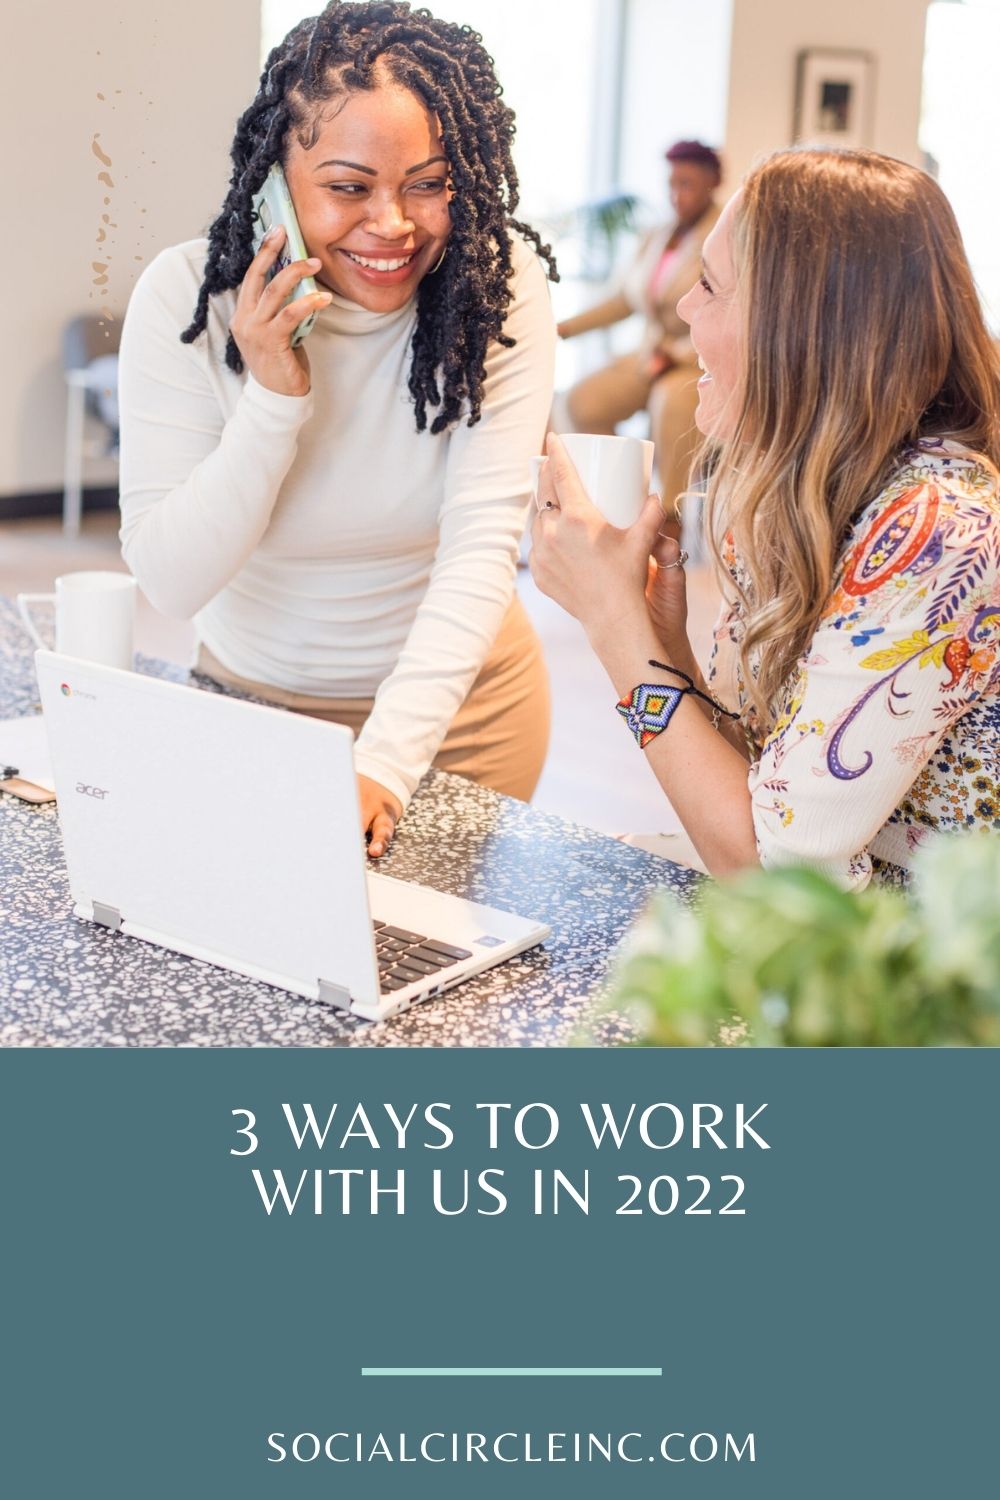 3 Ways to Work With Social Circle Inc in 2022 1